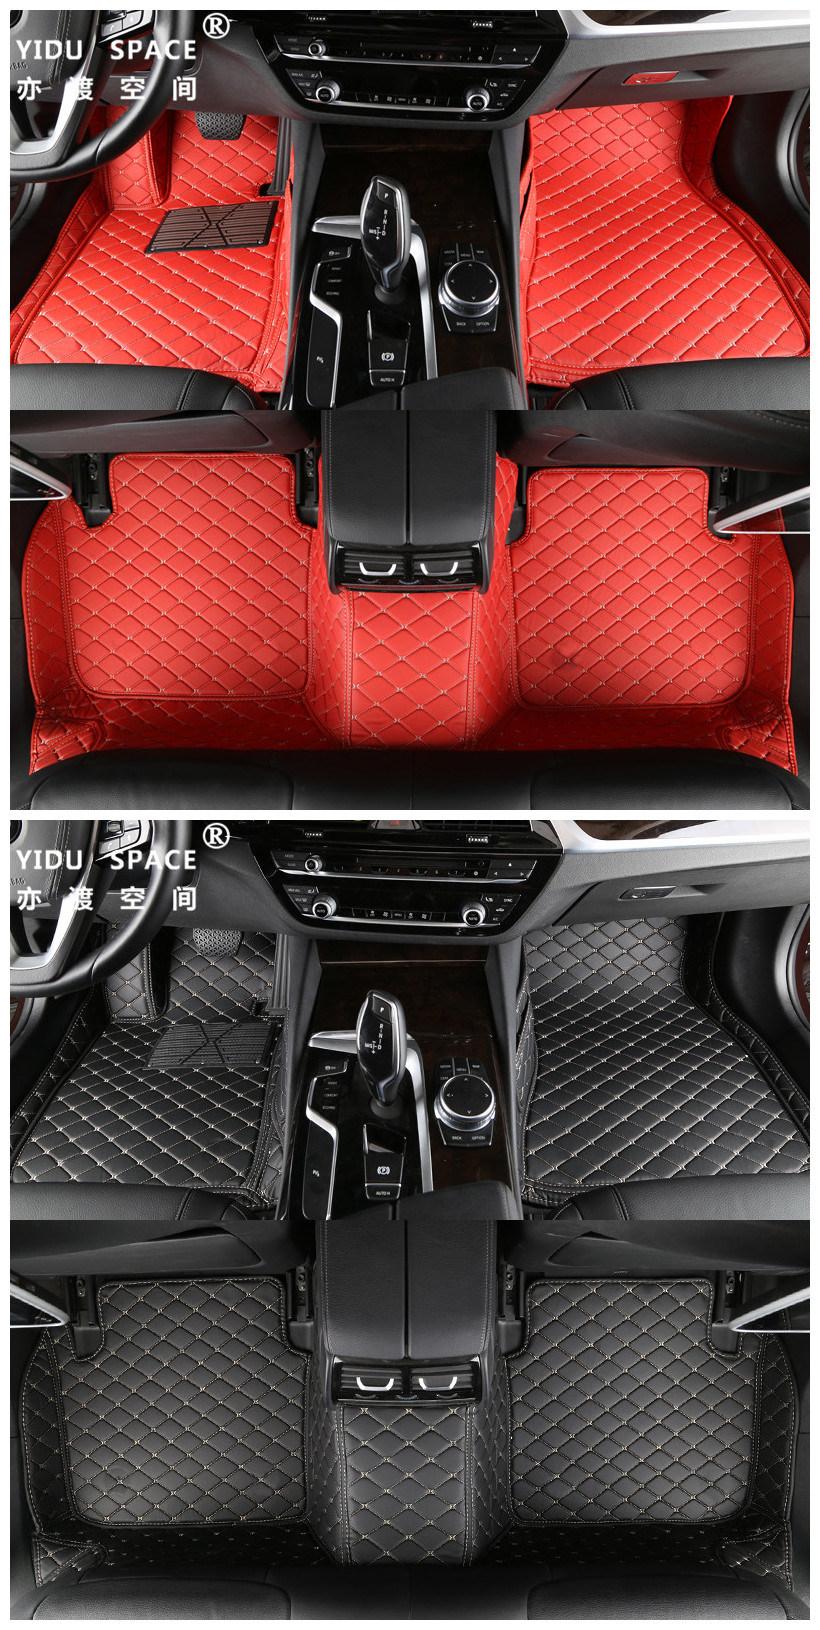 Environment-Friendly Leather Special 5D Anti Slip Wholesale Car Foot Mat